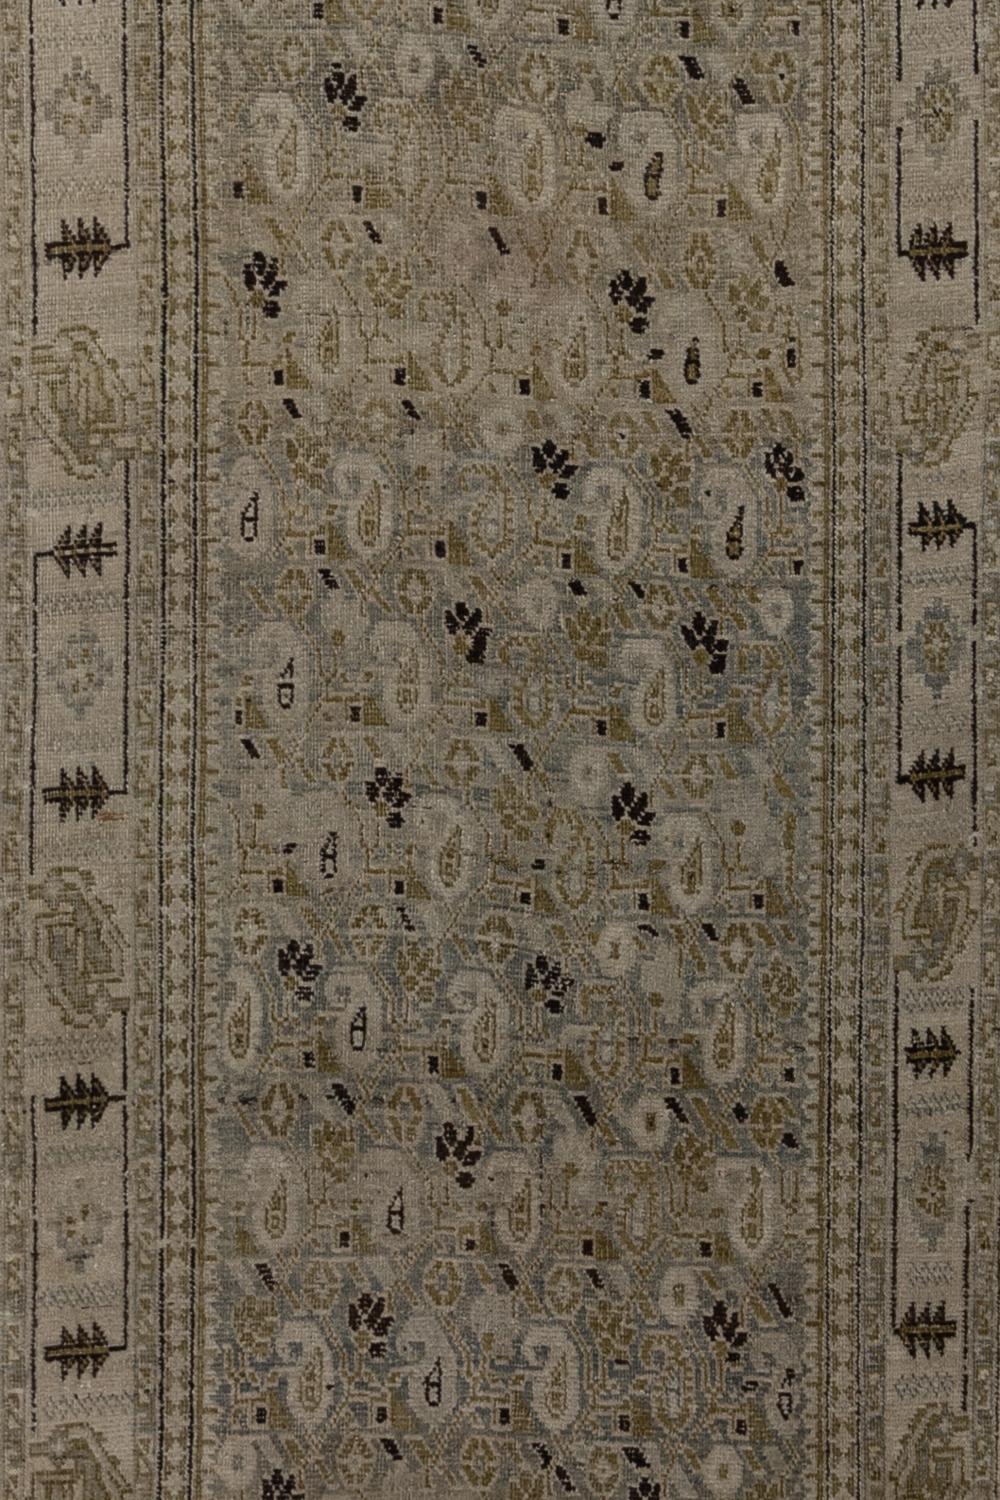 Age: early 20th century

Pile: medium 

Wear Notes: 1-2

Material: Wool on Cotton

Soft pile, good condition antique Persian Afshar runner with a neutral but unique color palette that allows for endless styling options. 

Vintage rugs are